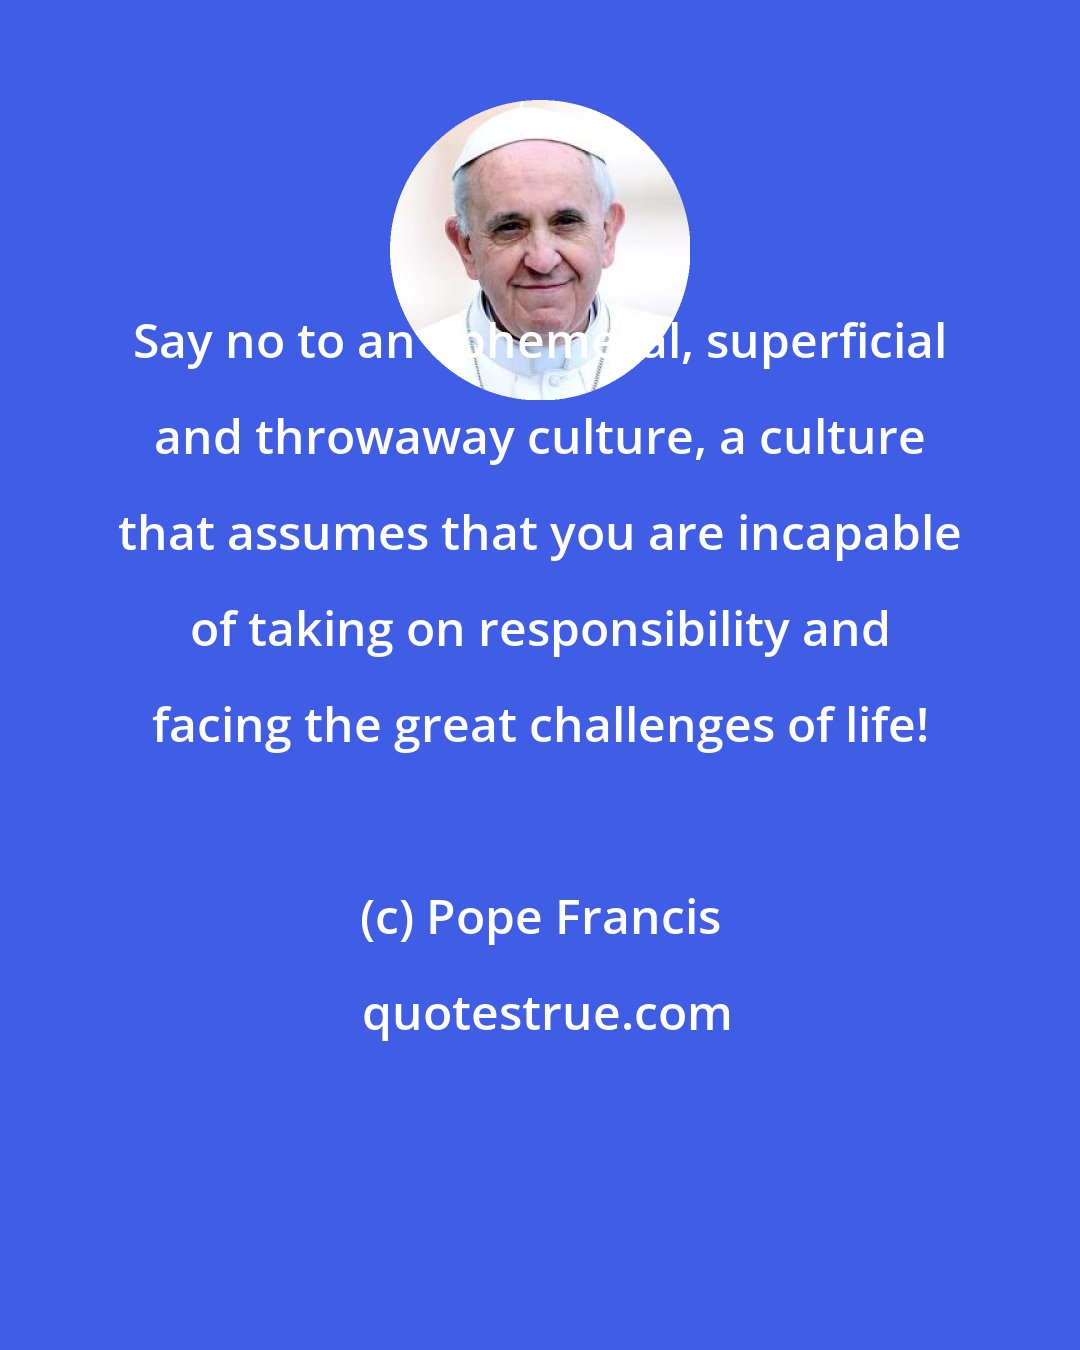 Pope Francis: Say no to an ephemeral, superficial and throwaway culture, a culture that assumes that you are incapable of taking on responsibility and facing the great challenges of life!